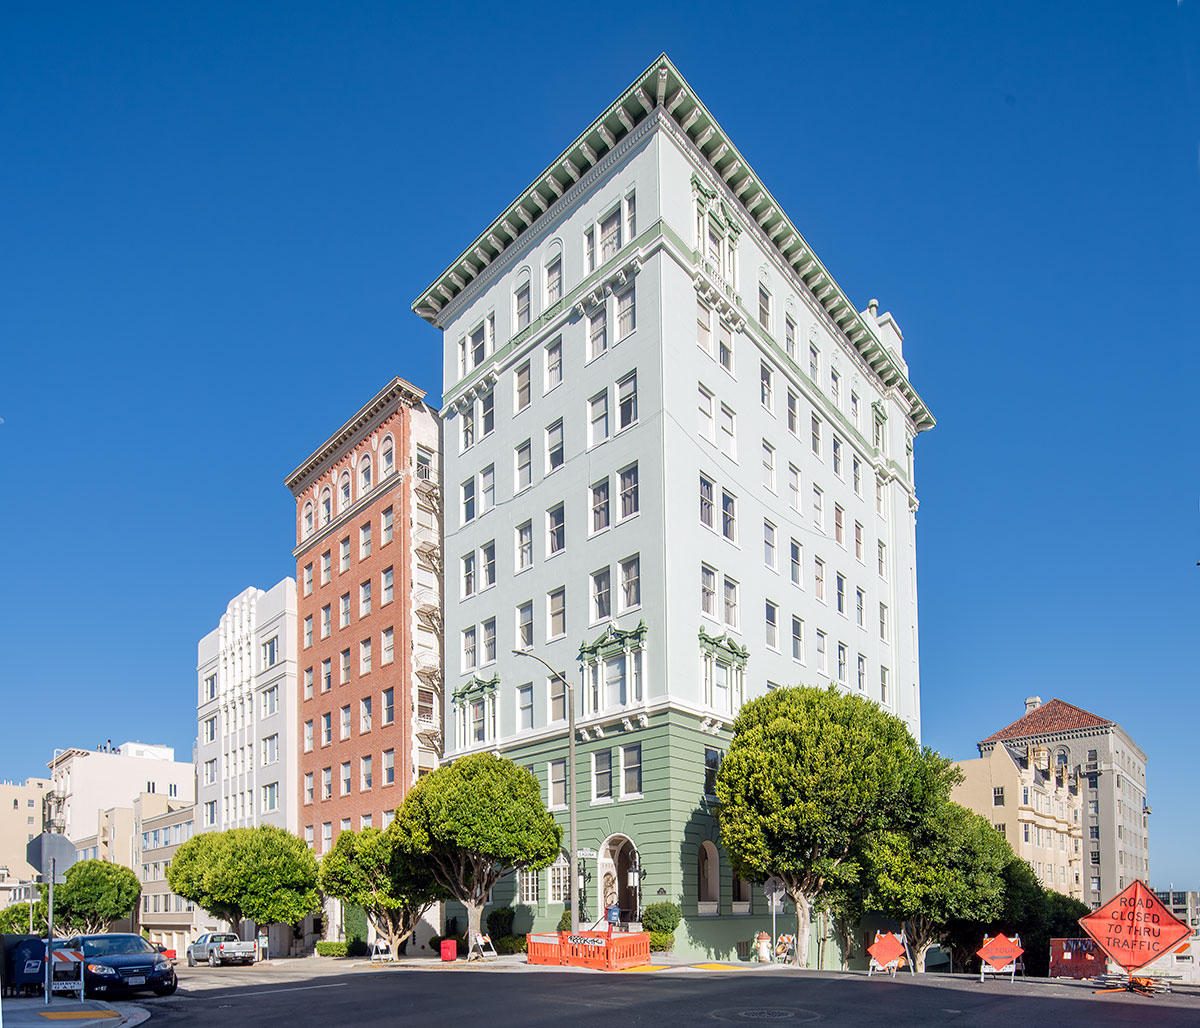 2100 Jackson Street in Pacific Heights, designed by Conrad Meussdorffer, built 1923